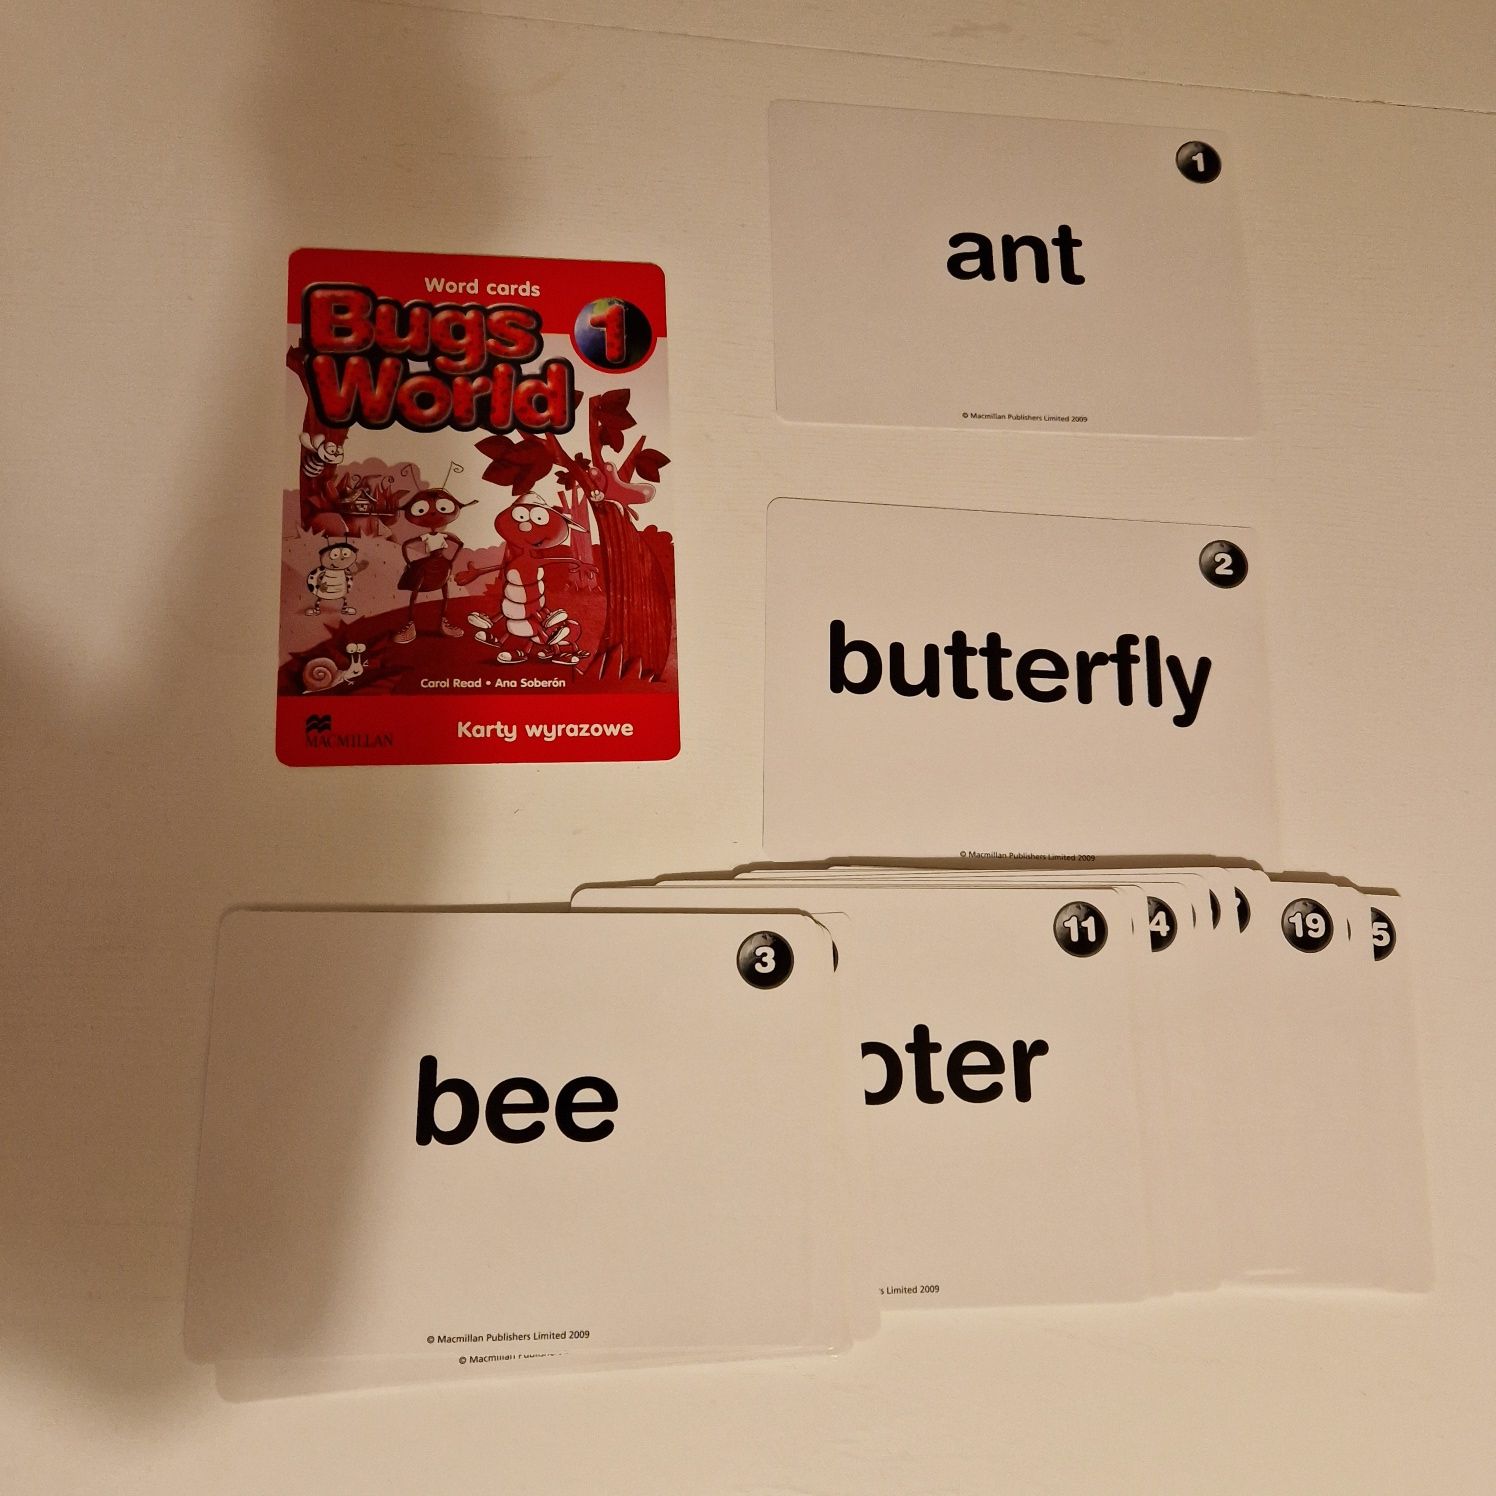 word cards bugs world 1